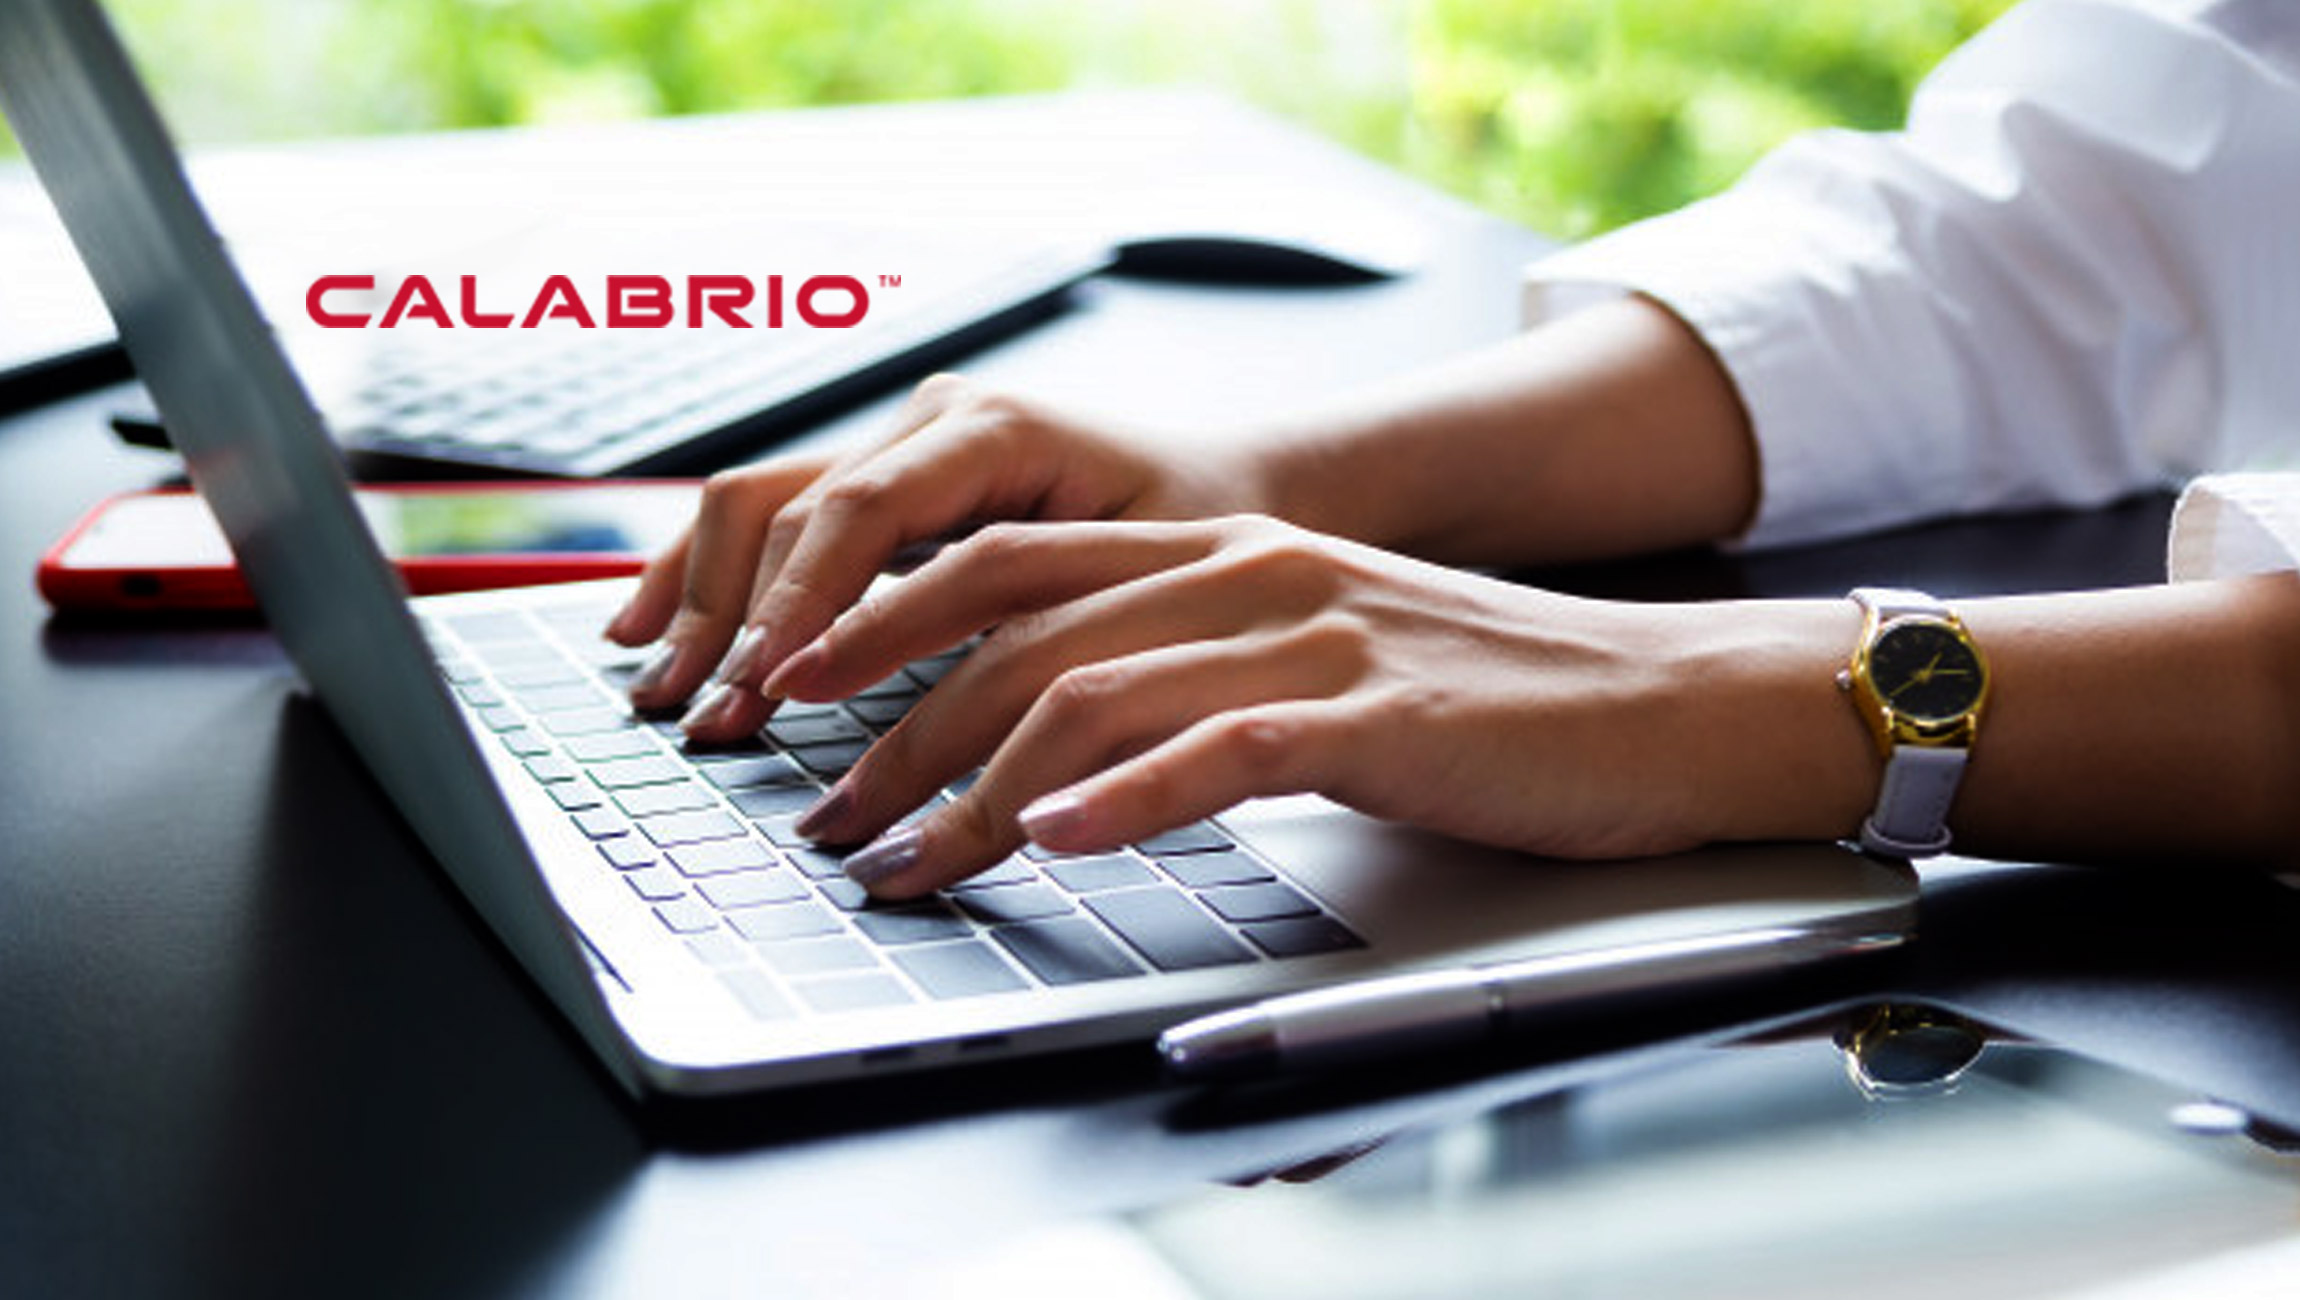 New Self-Scheduling Package From Calabrio Empowers Agents to Have Greater Influence Over Work-Life Balance